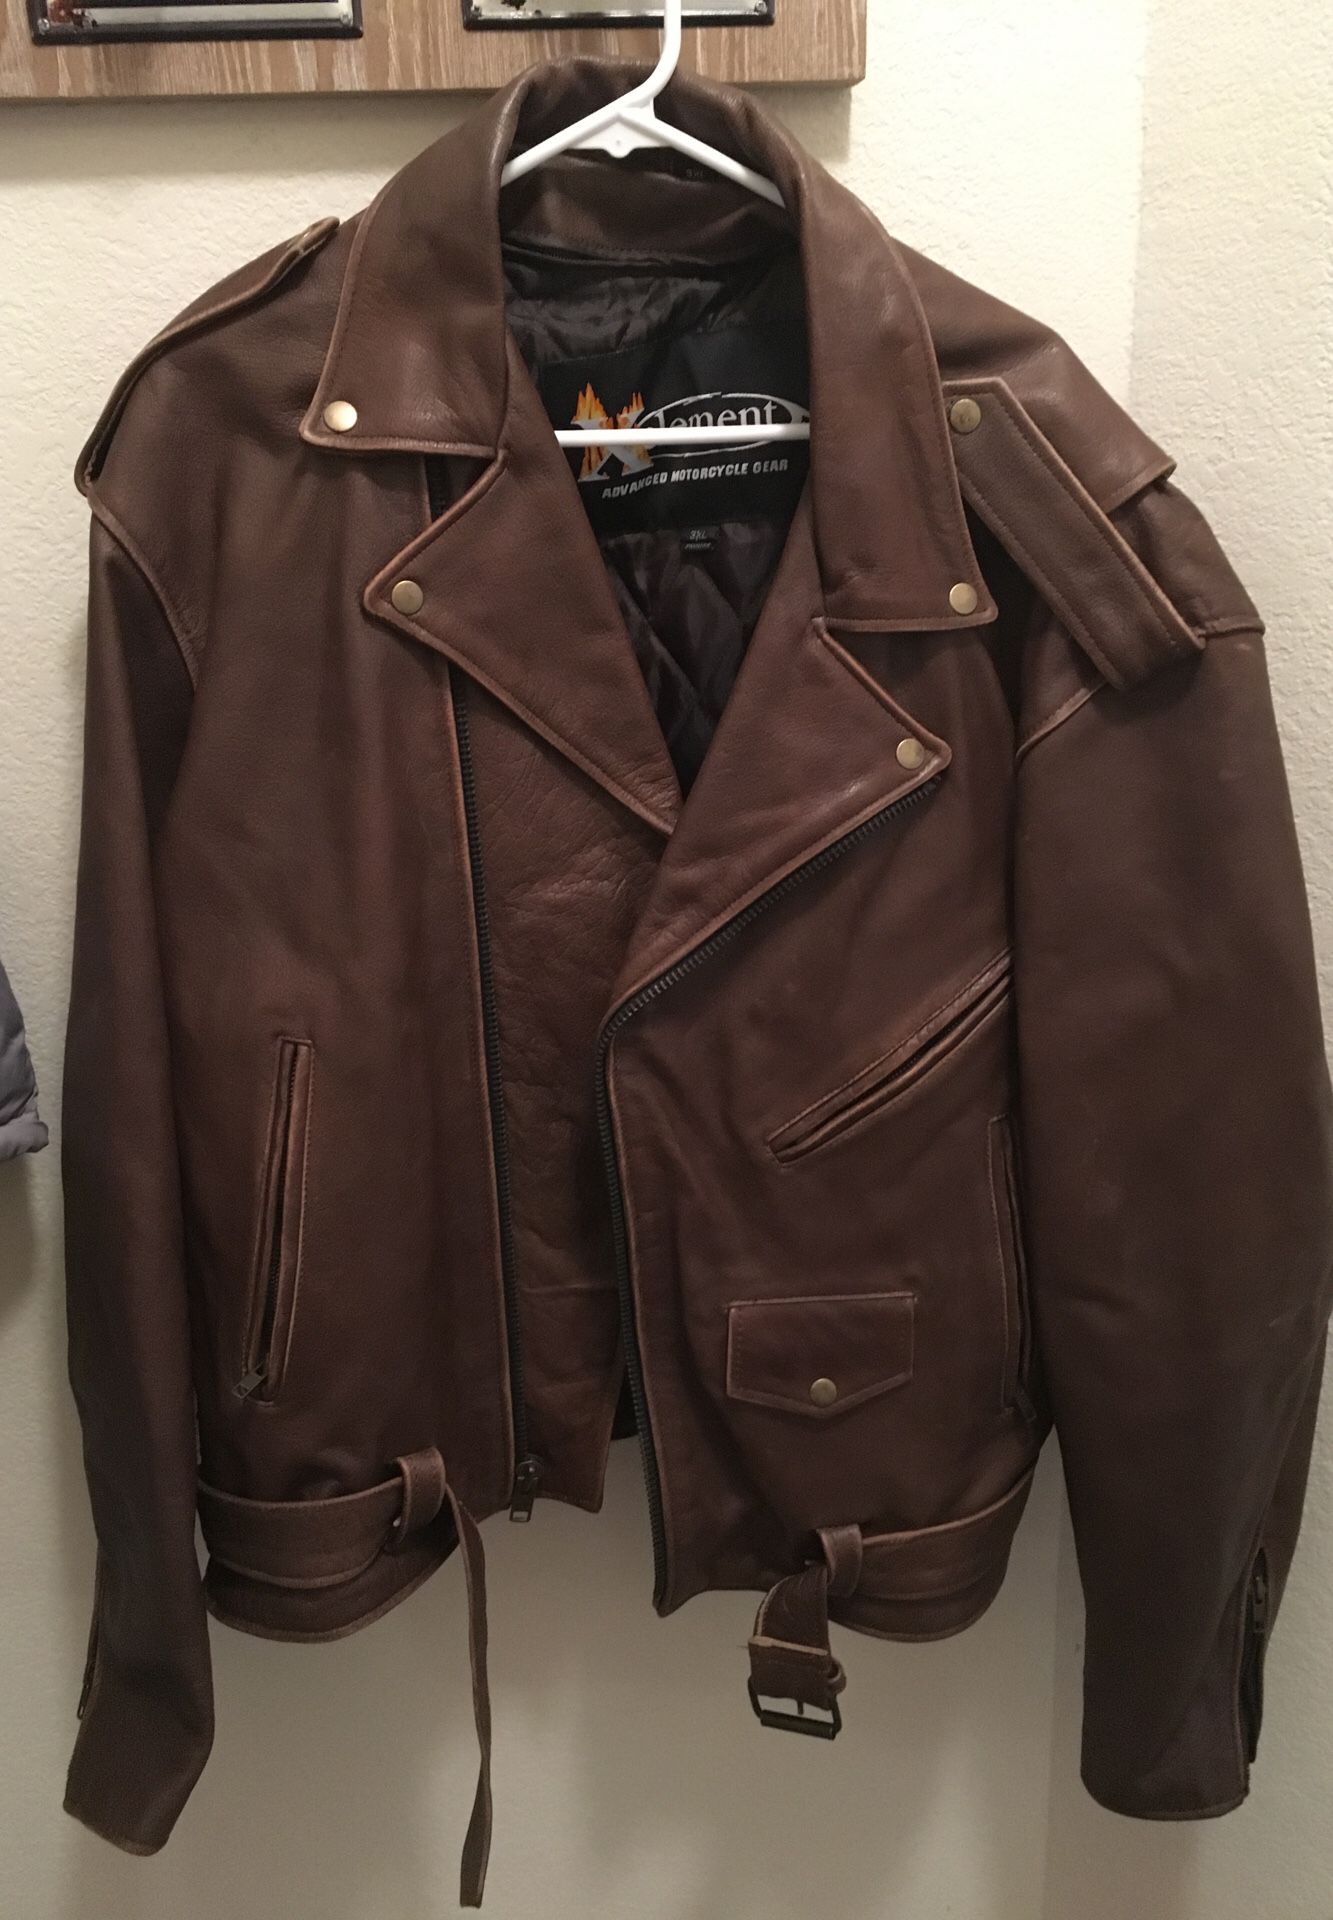 X element - advanced motorcycle gear- brown leather jacket- 3XL